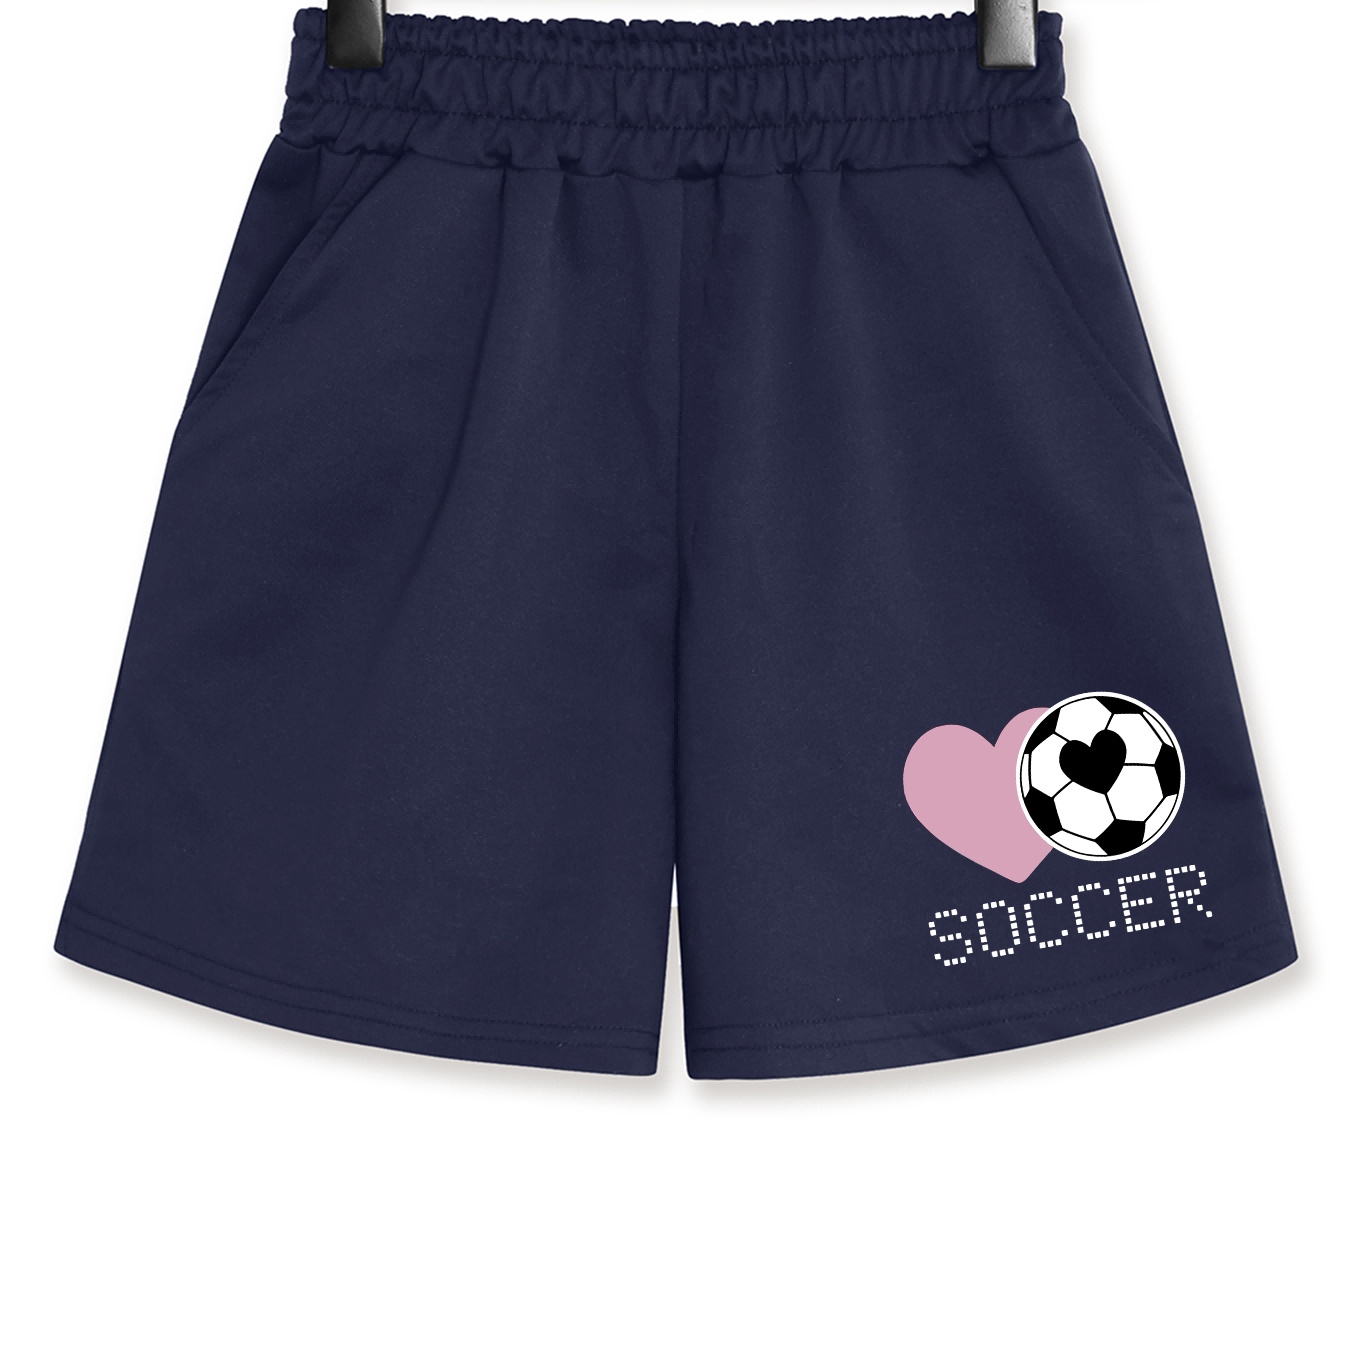 

Love Soccer Print Girl's Solid Color Slightly Stretch Shorts With Side Pockets, Casual Breathable Comfy Bottoms For Outdoor Jogging, Running, Sport Activities